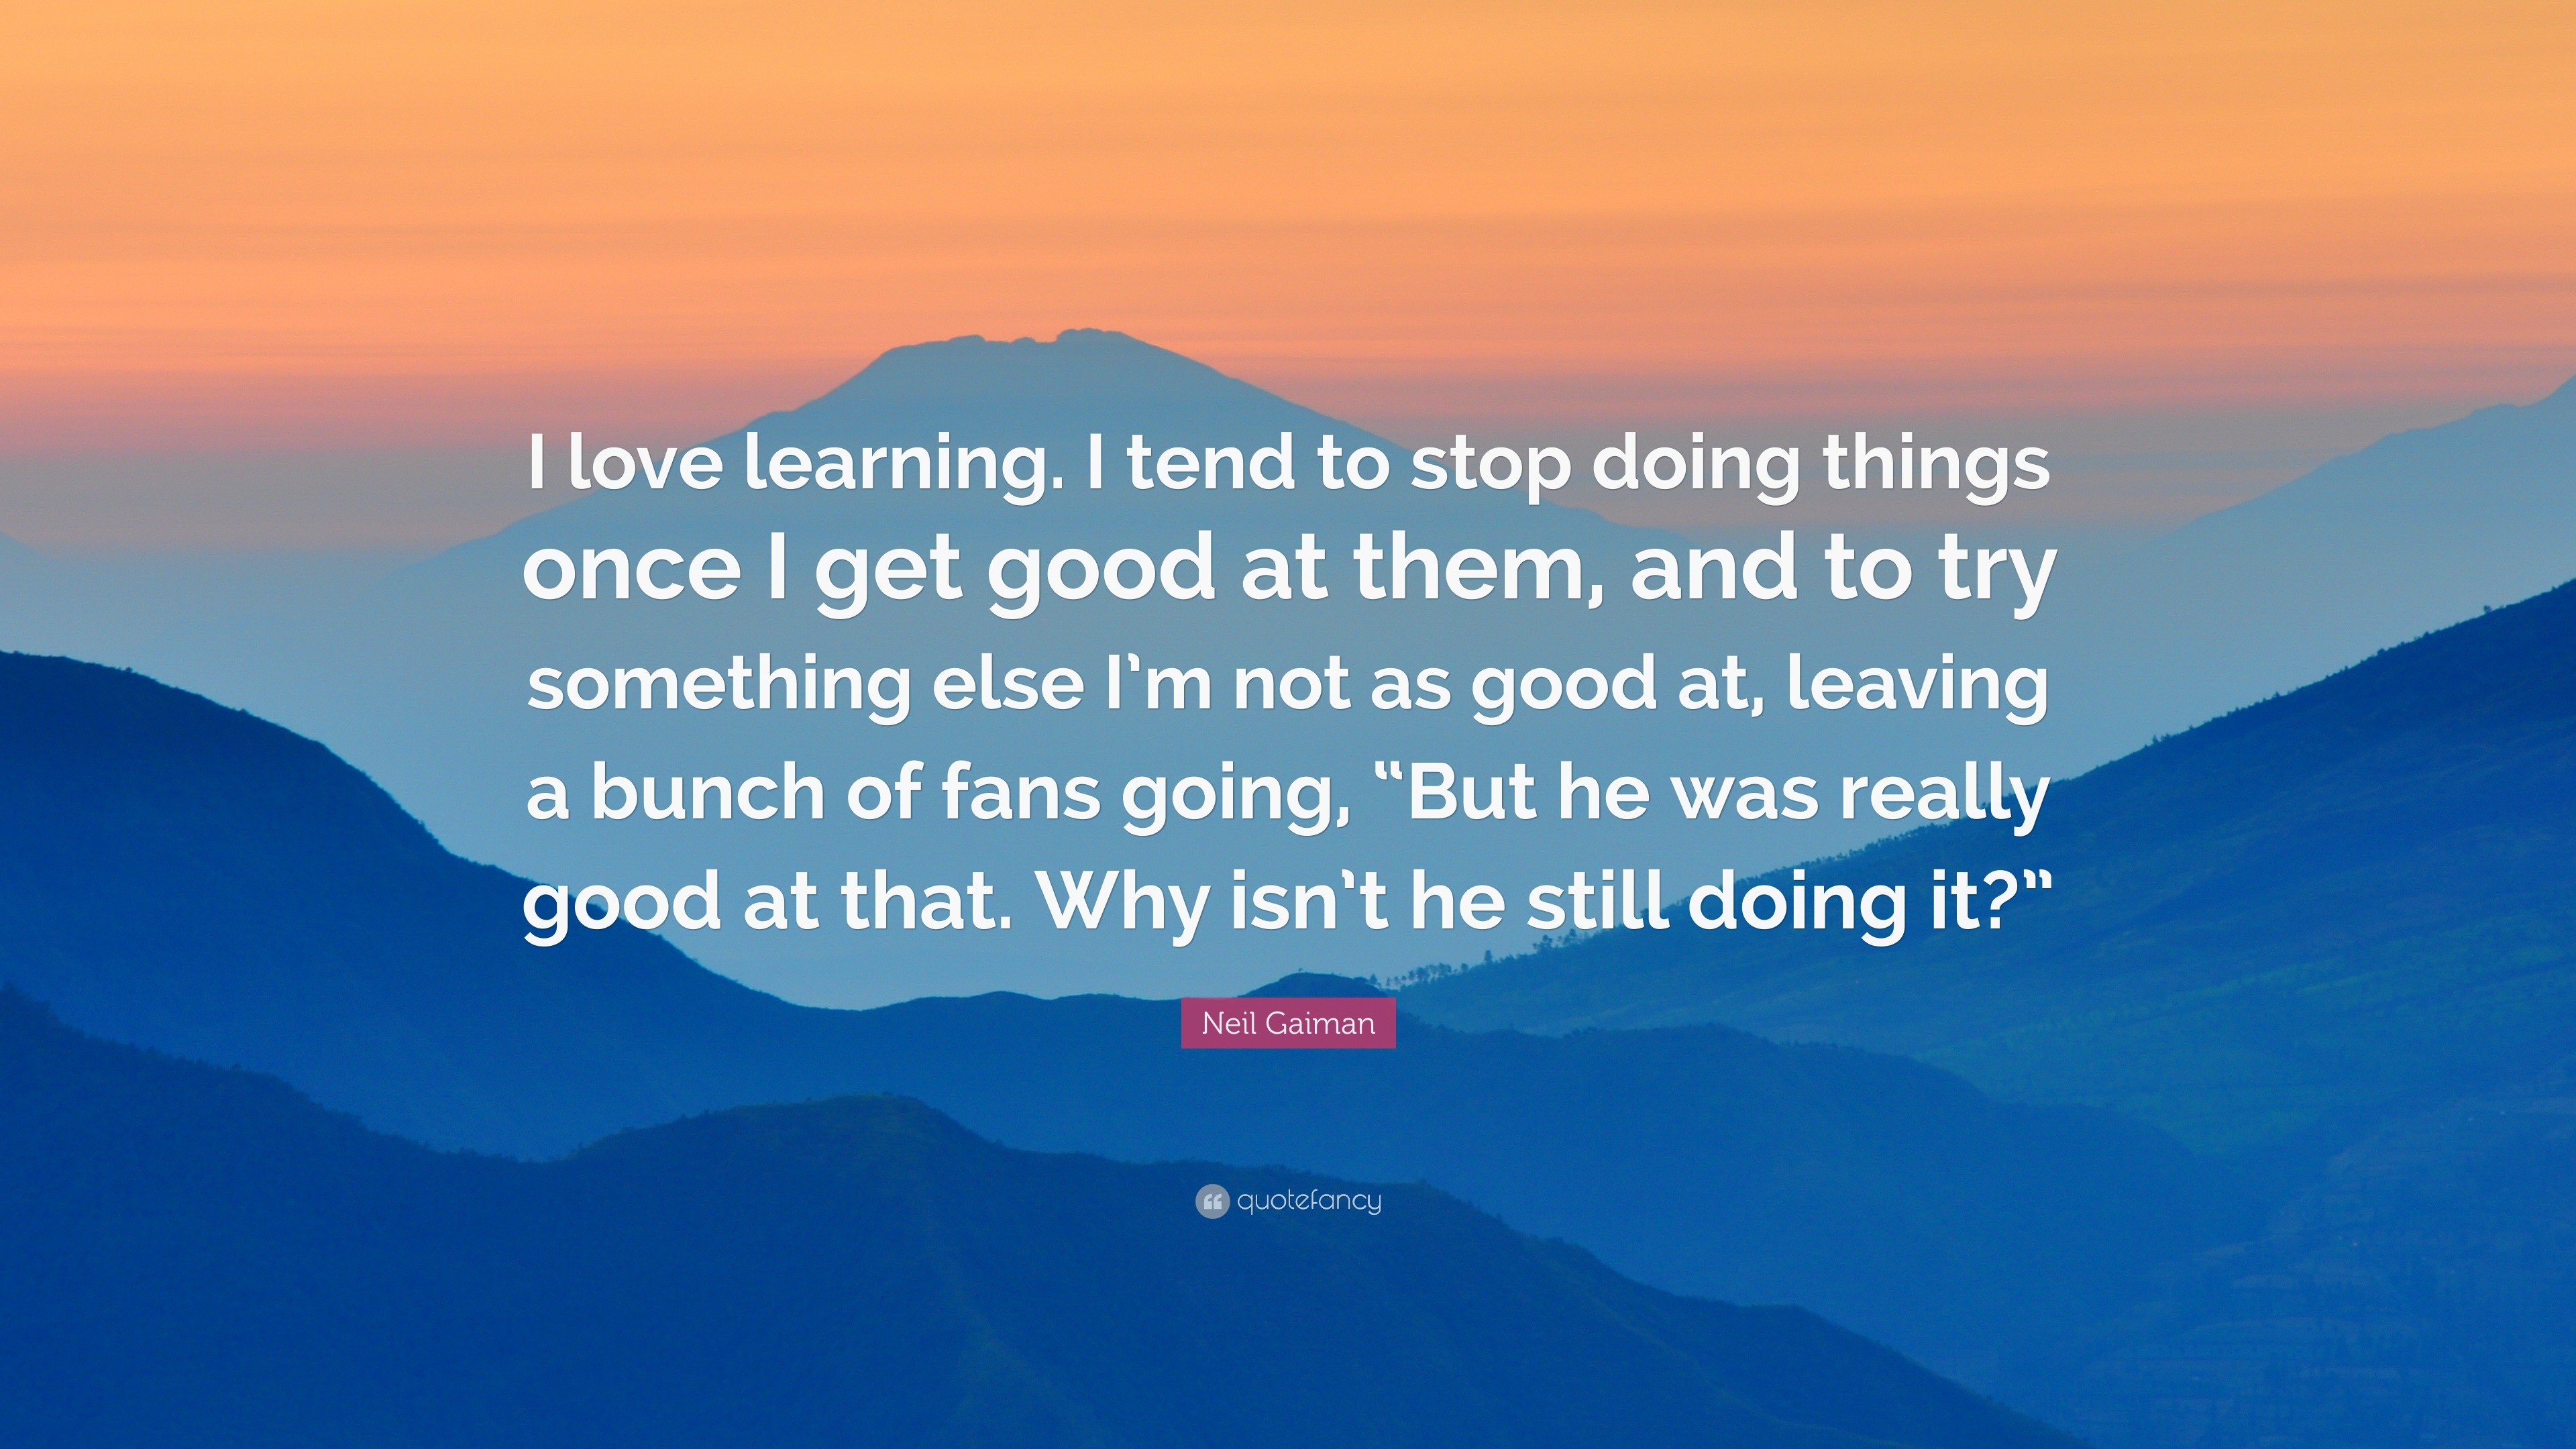 Neil Gaiman Quote “I love learning I tend to stop doing things once